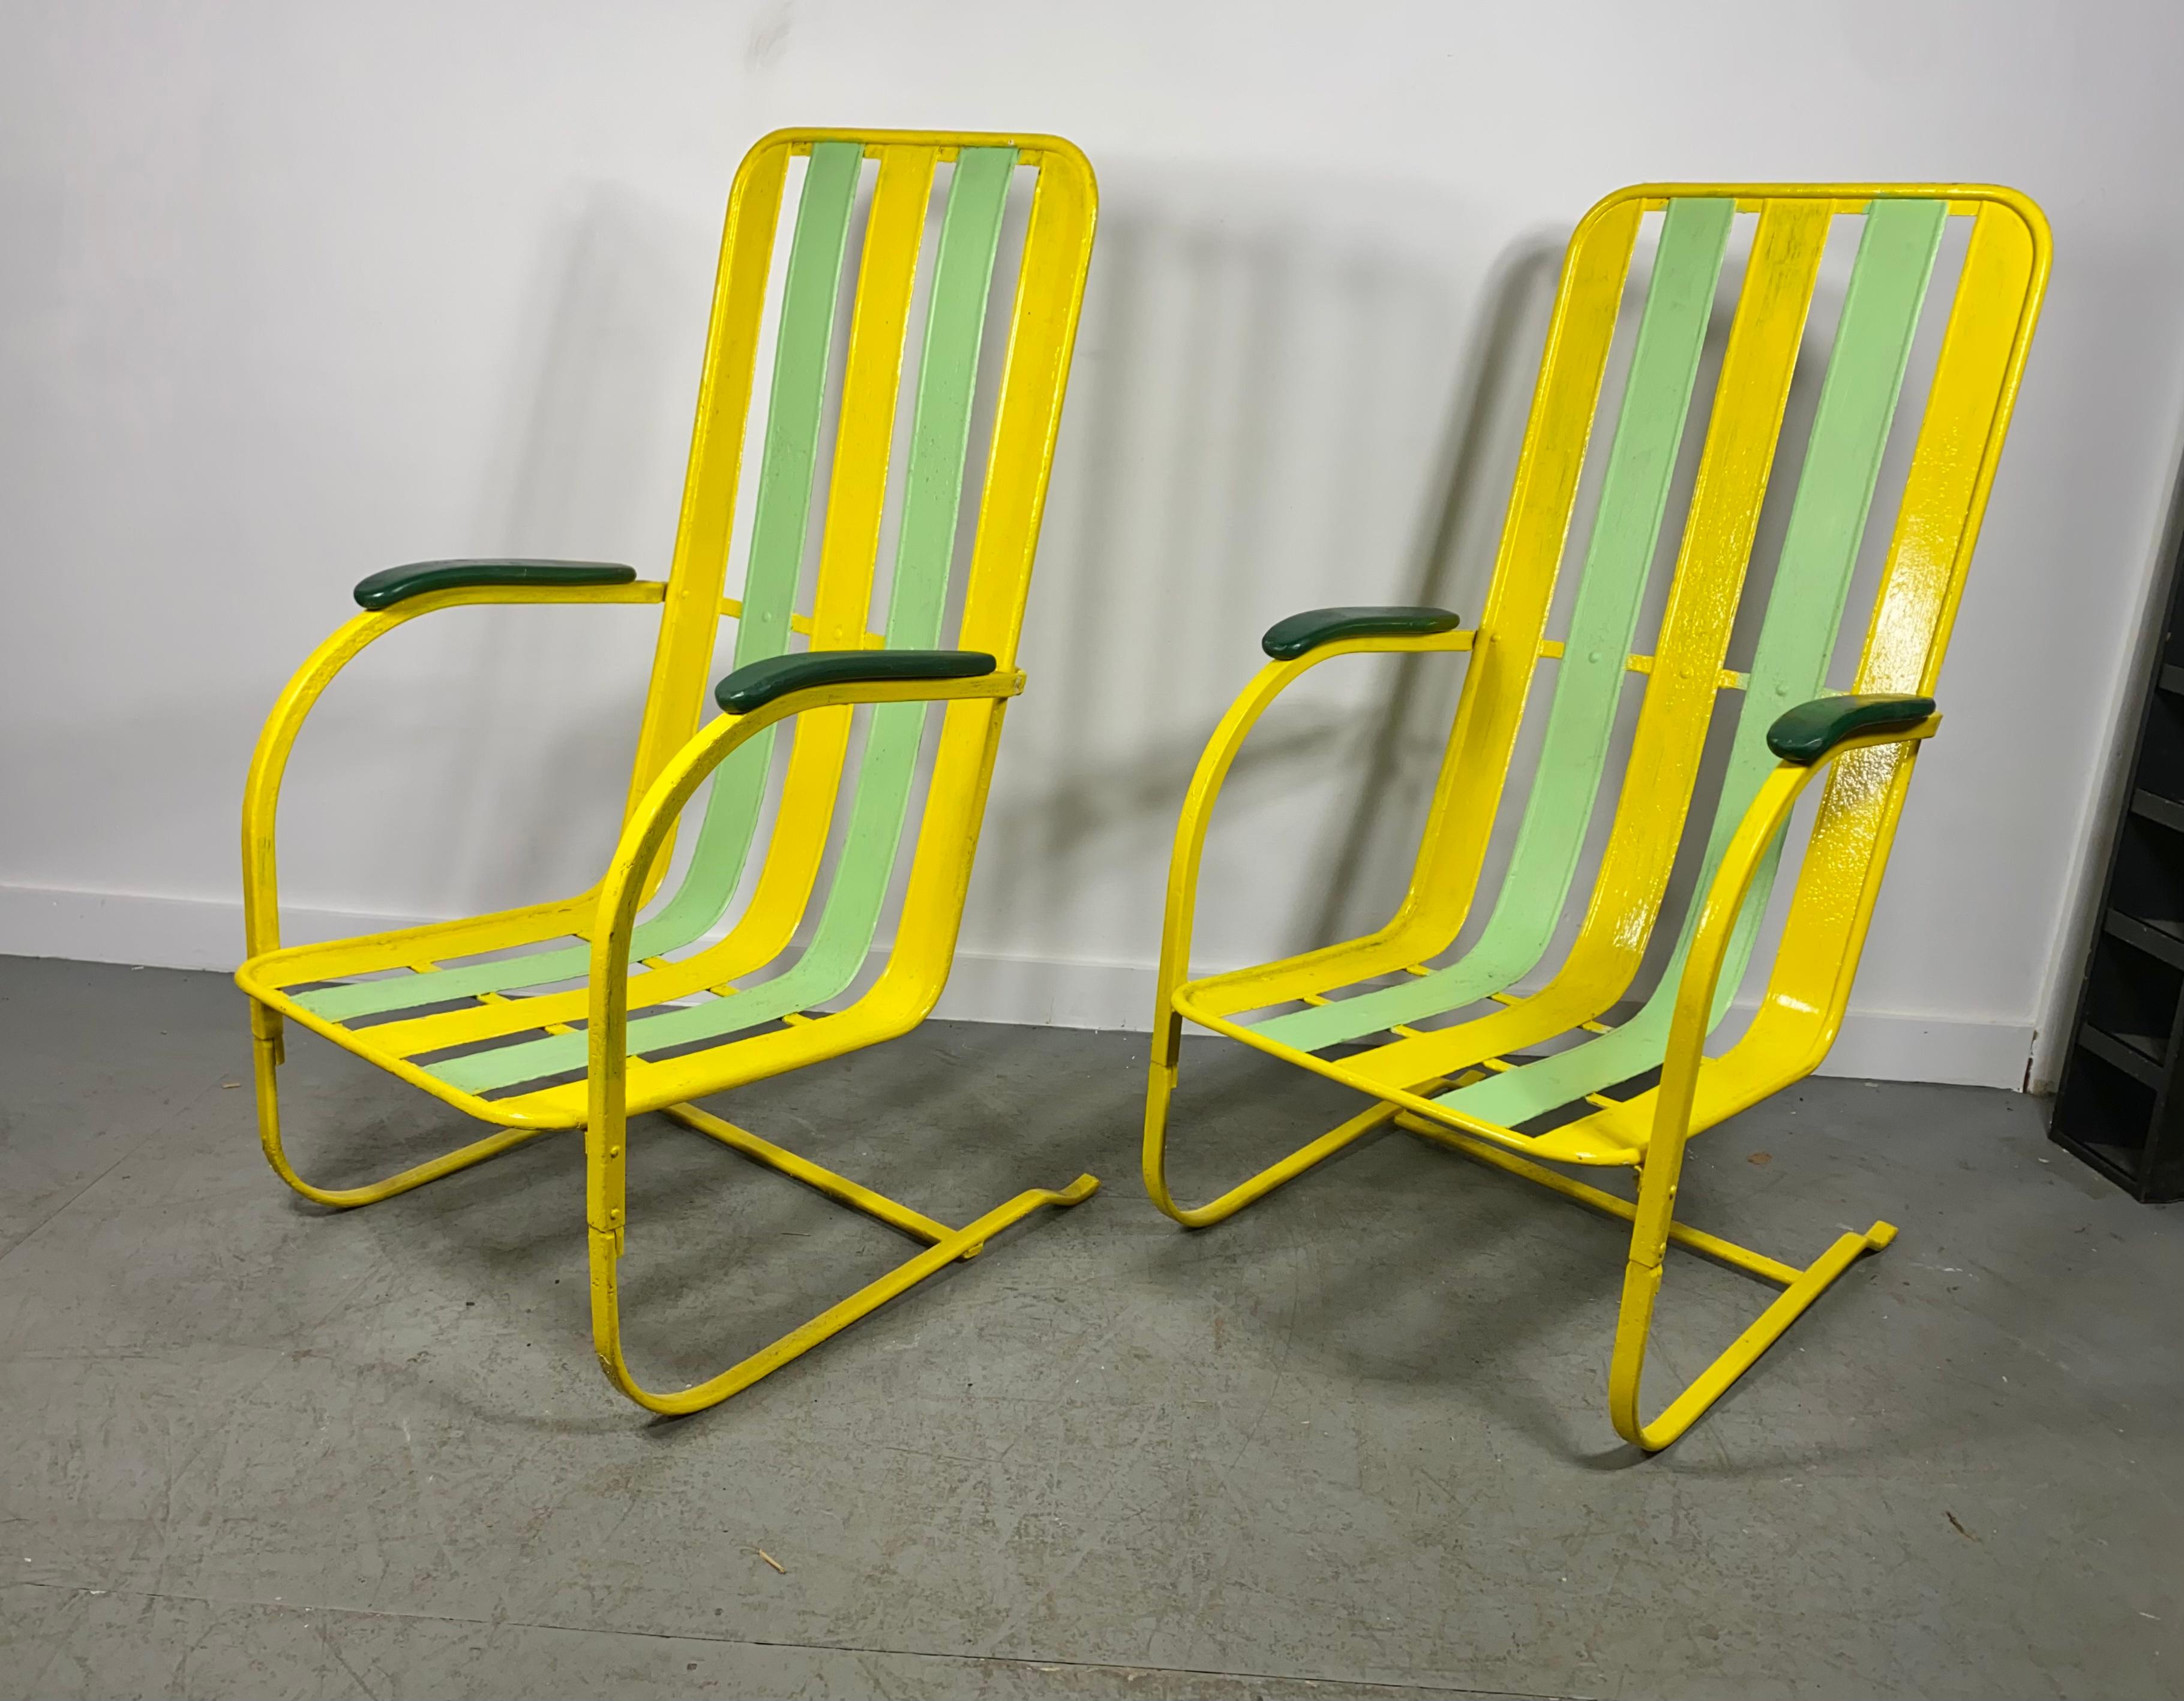 American Classic Pair Art Deco High Back Slatted Spring Steel Lounge Chairs For Sale